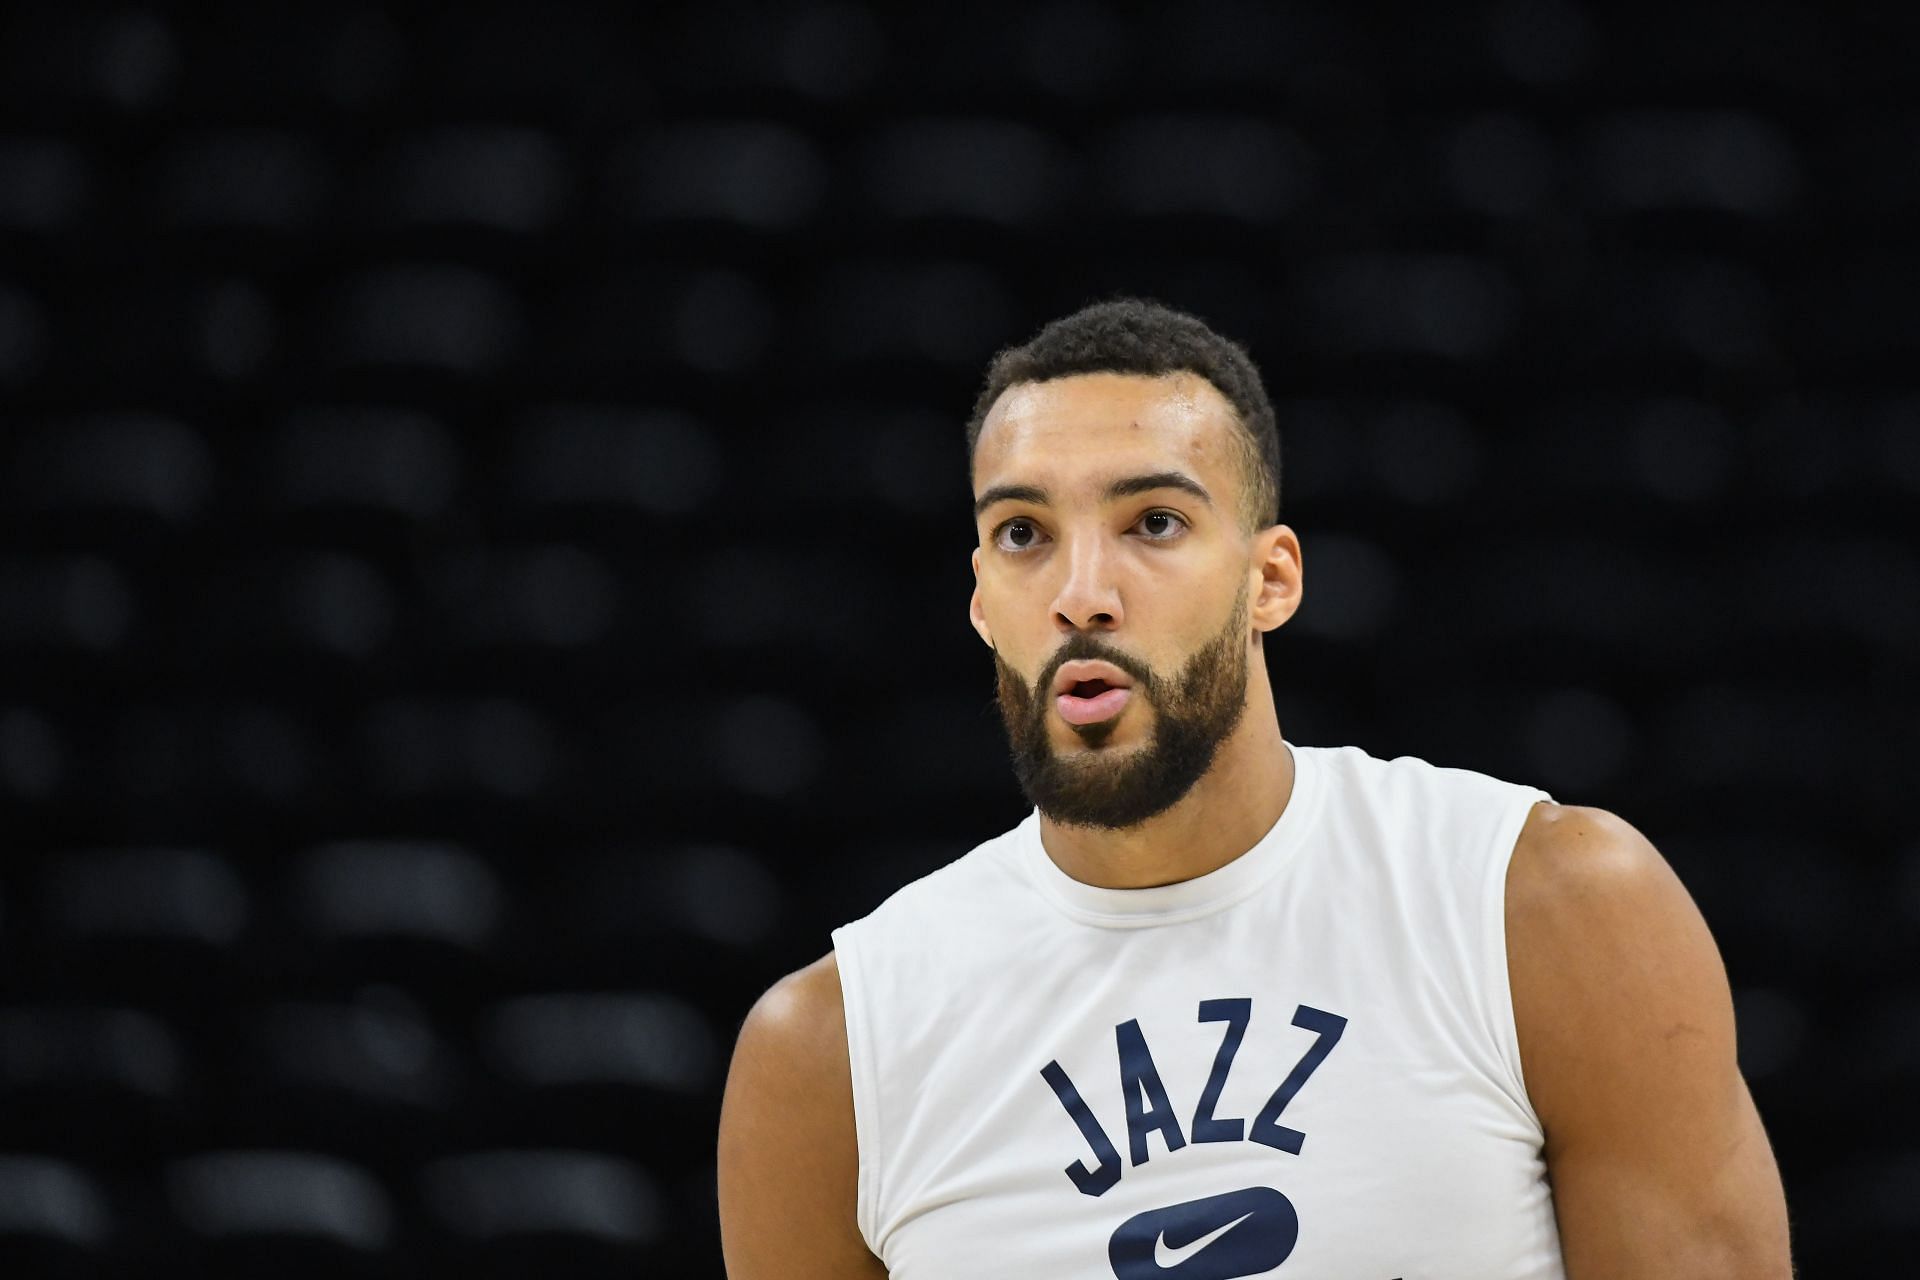 Rudy Gobert warms up before a game